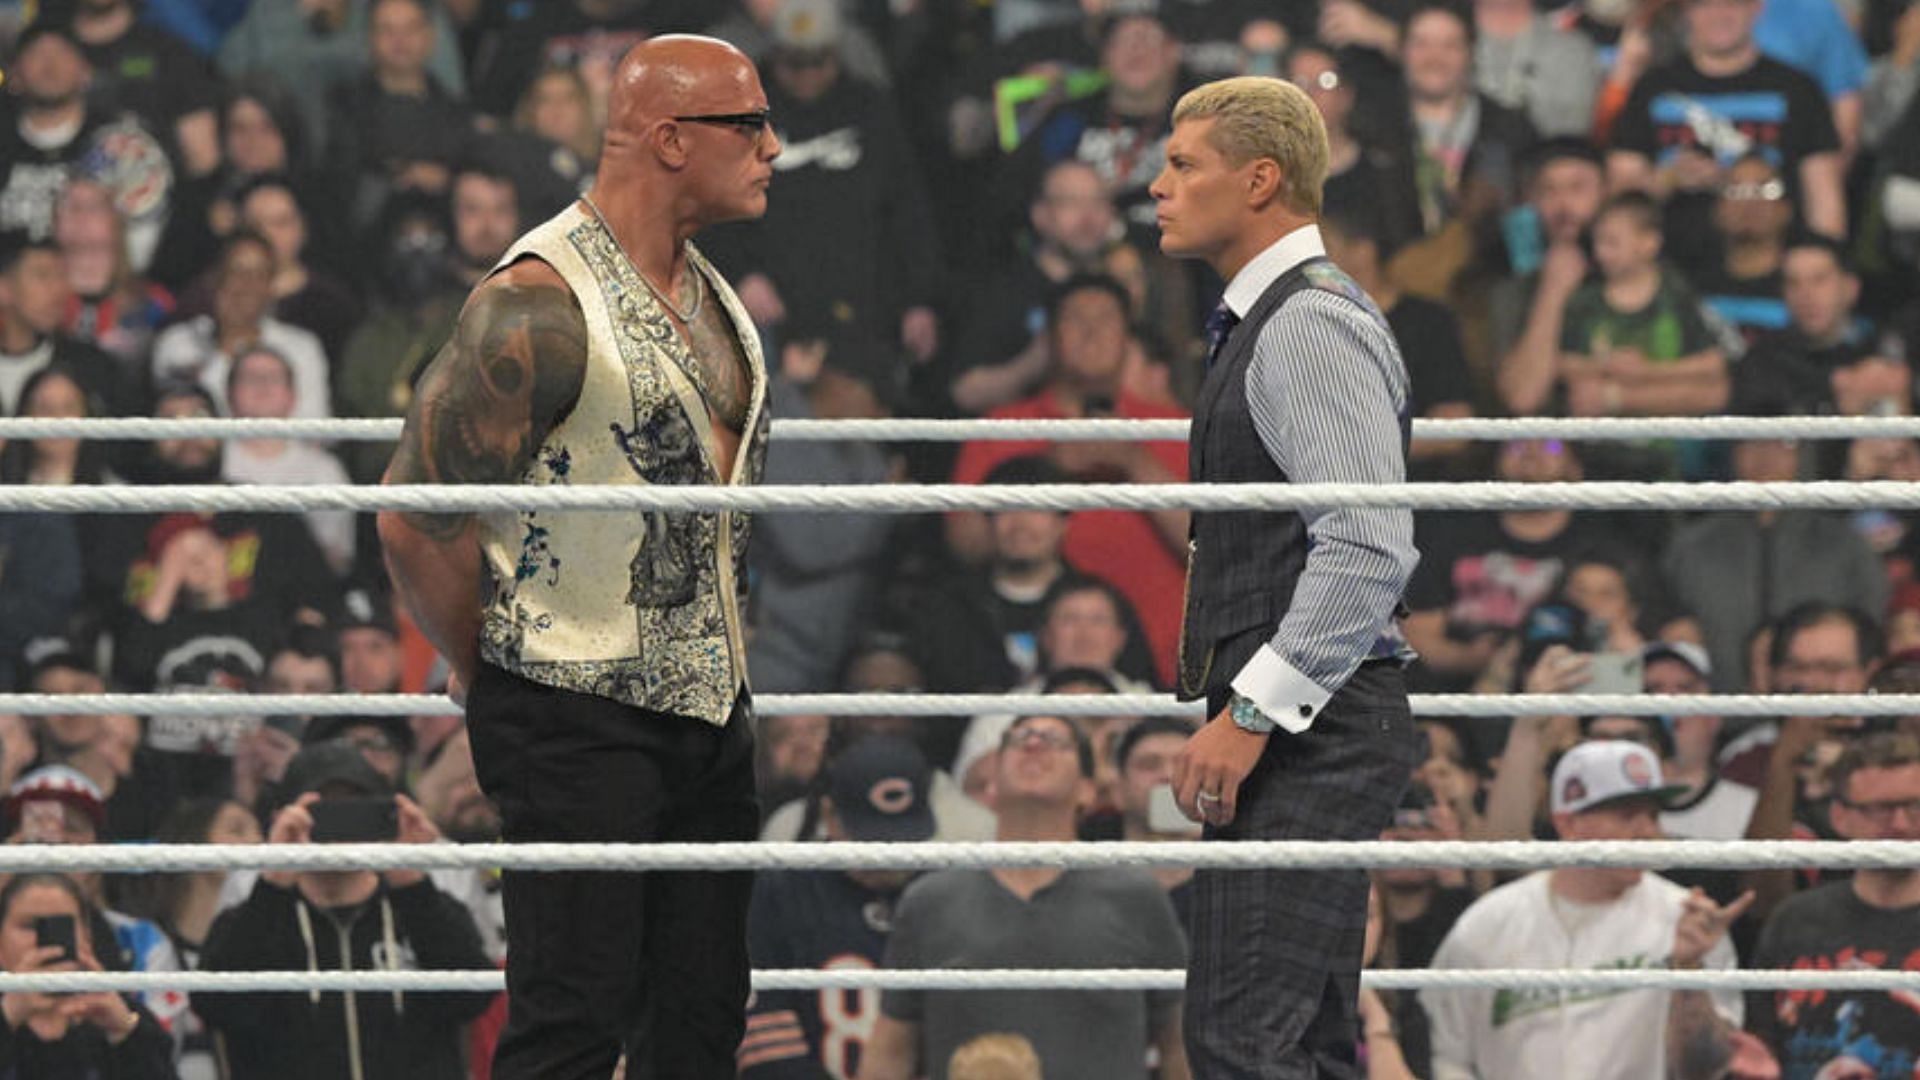 Cody Rhodes and The Rock are now sworn enemies